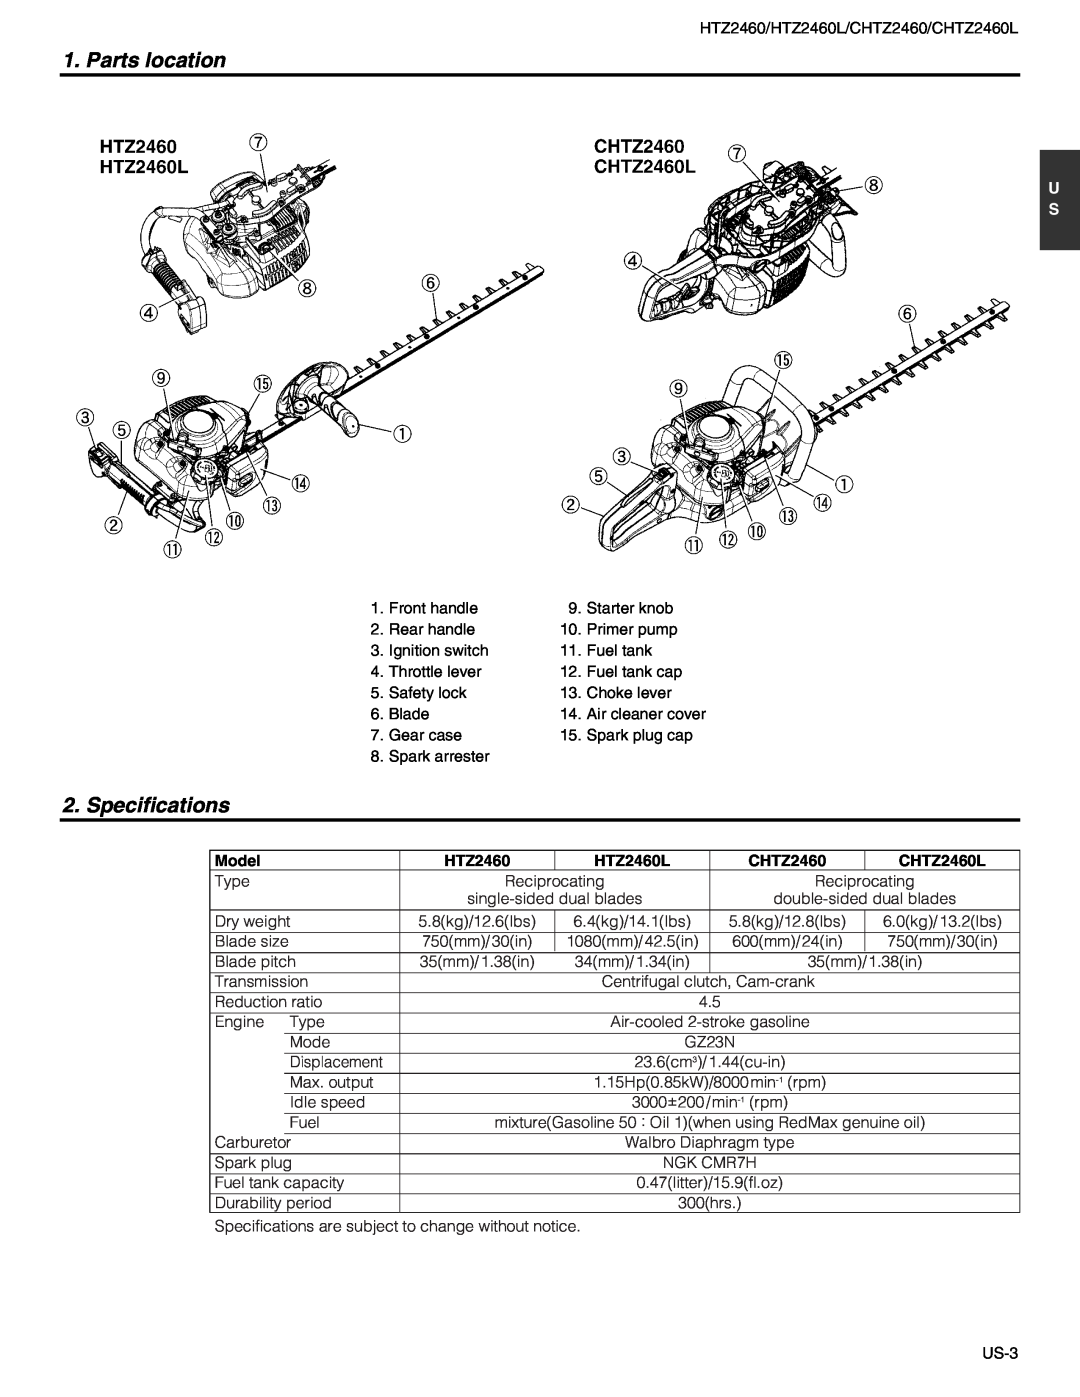 RedMax manual Parts location, Specifications, Model, CHTZ2460L 